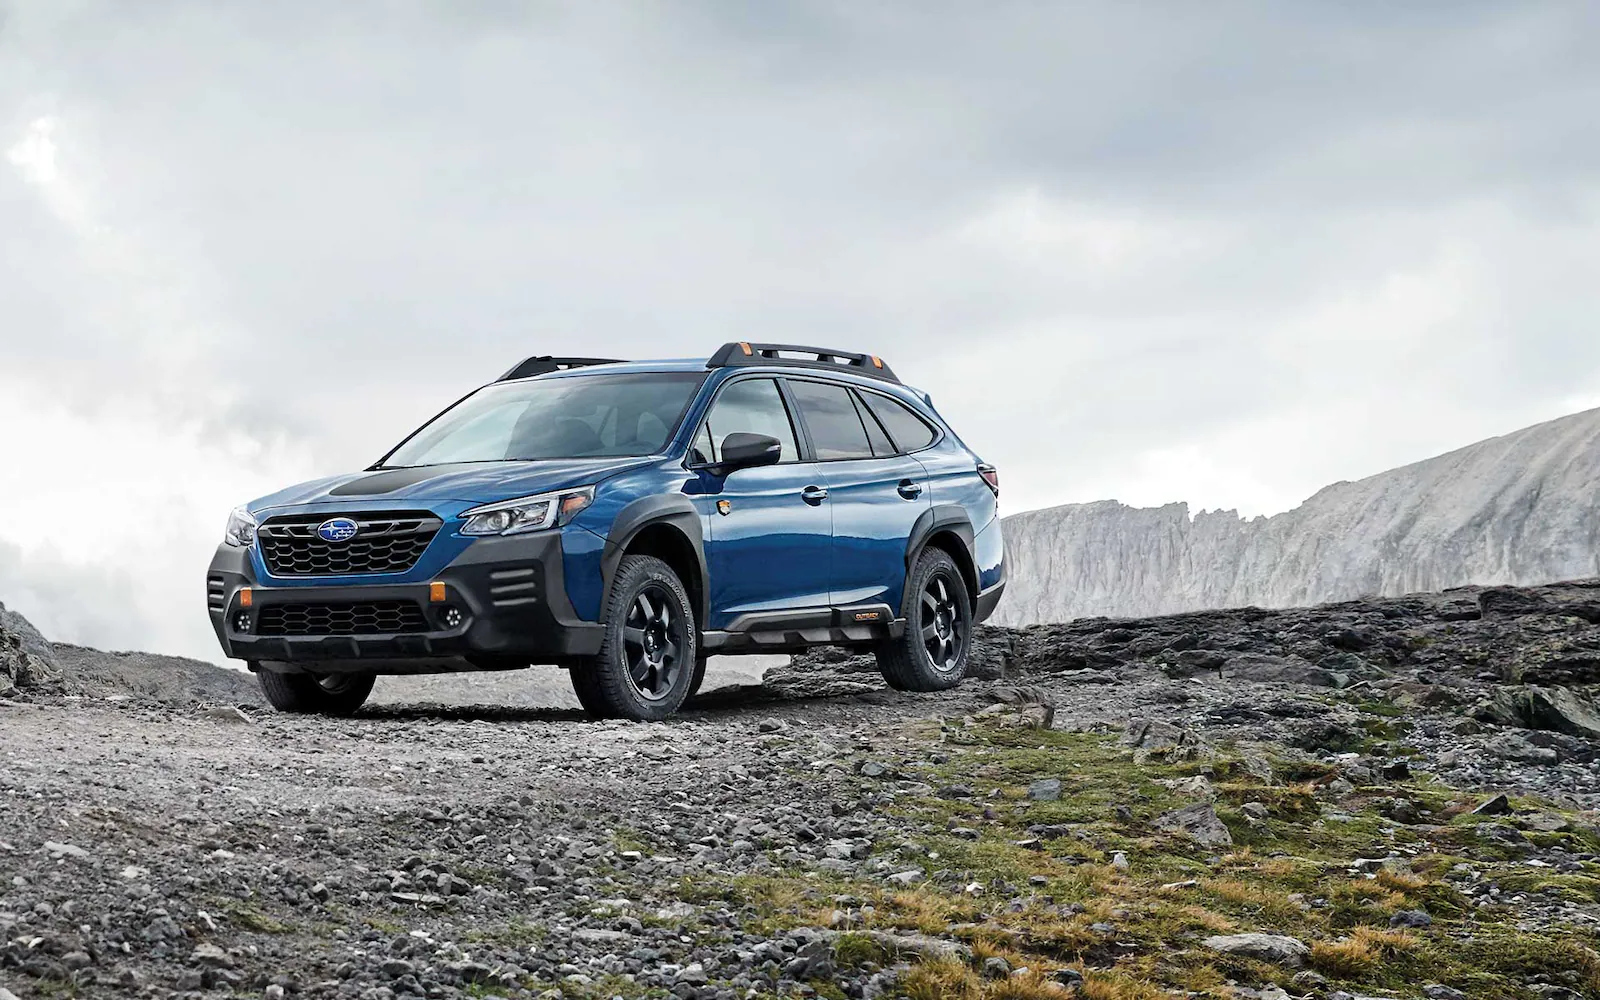 Side angled view of a blue Subaru Outback Wilderness parked on rocky terrain